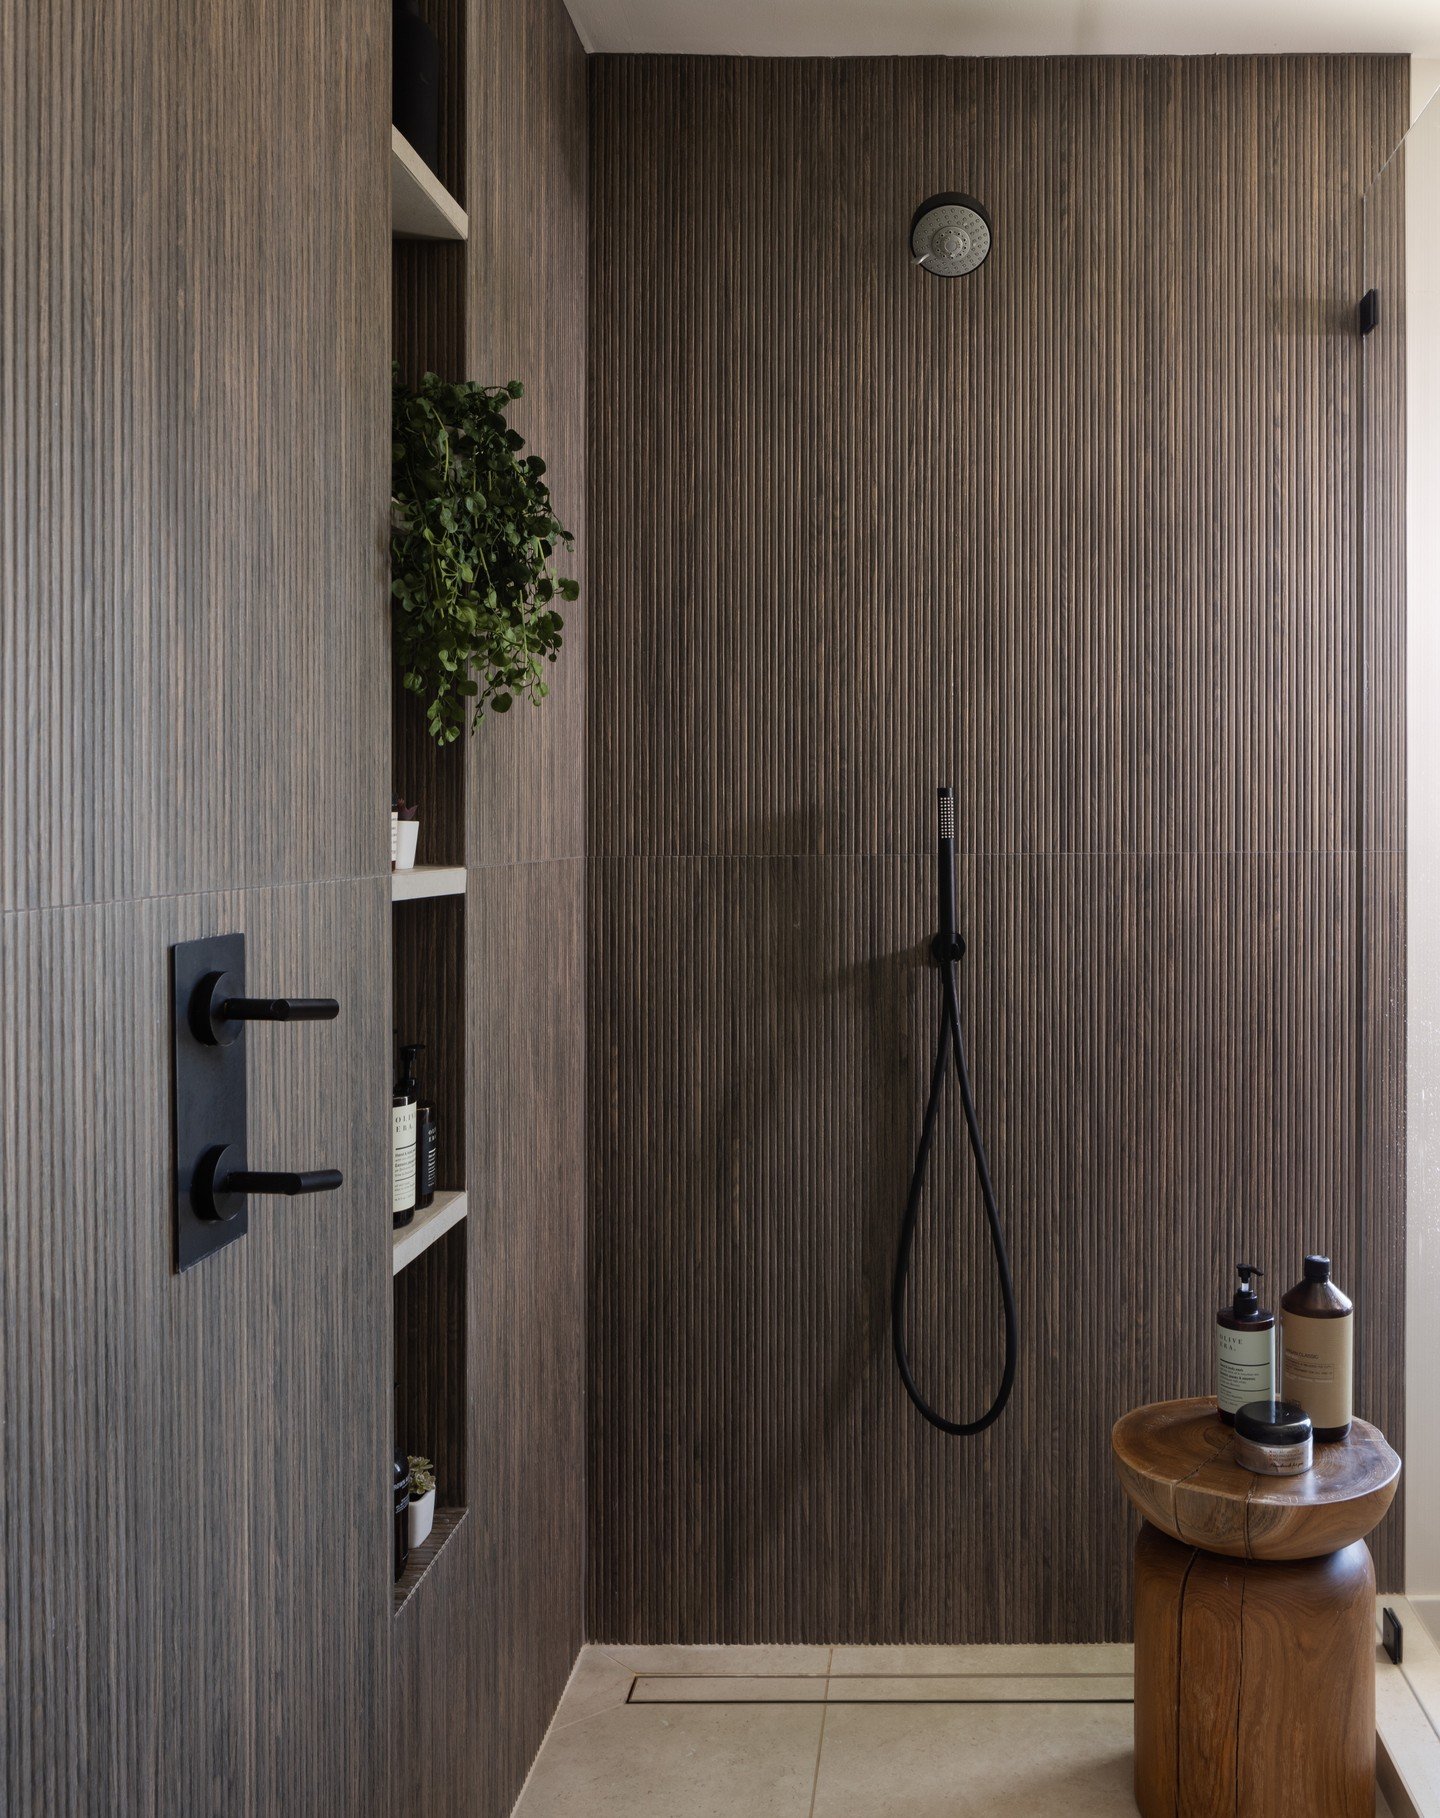 Loved the way the natural light entered this shower. Accented that natural light to help graze the textured shower tile.

Design by @alinaalegre
Photographed by @adriantiemens